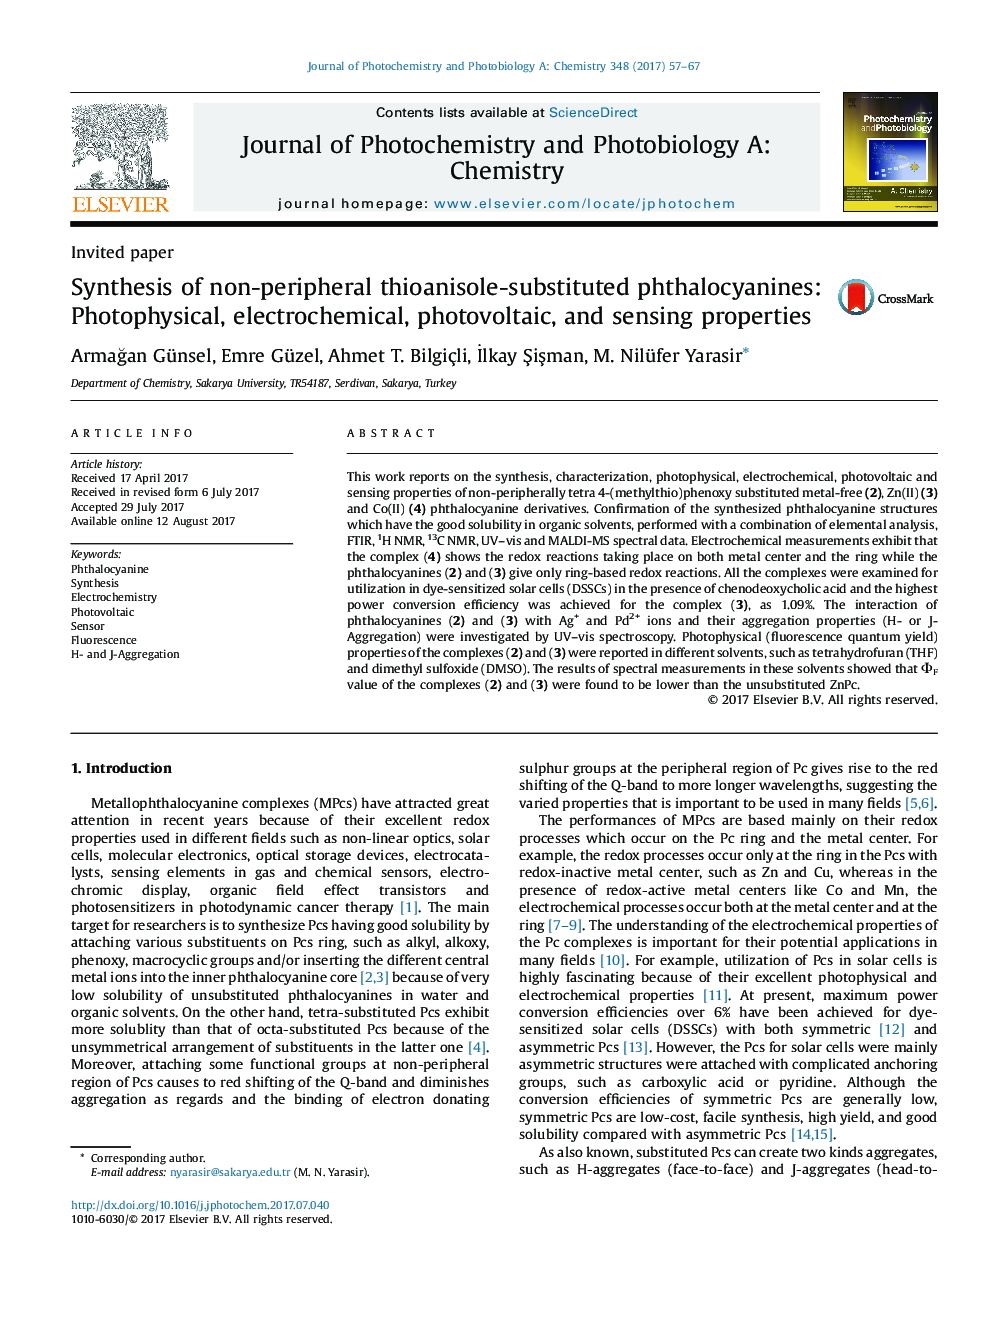 Invited paperSynthesis of non-peripheral thioanisole-substituted phthalocyanines: Photophysical, electrochemical, photovoltaic, and sensing properties